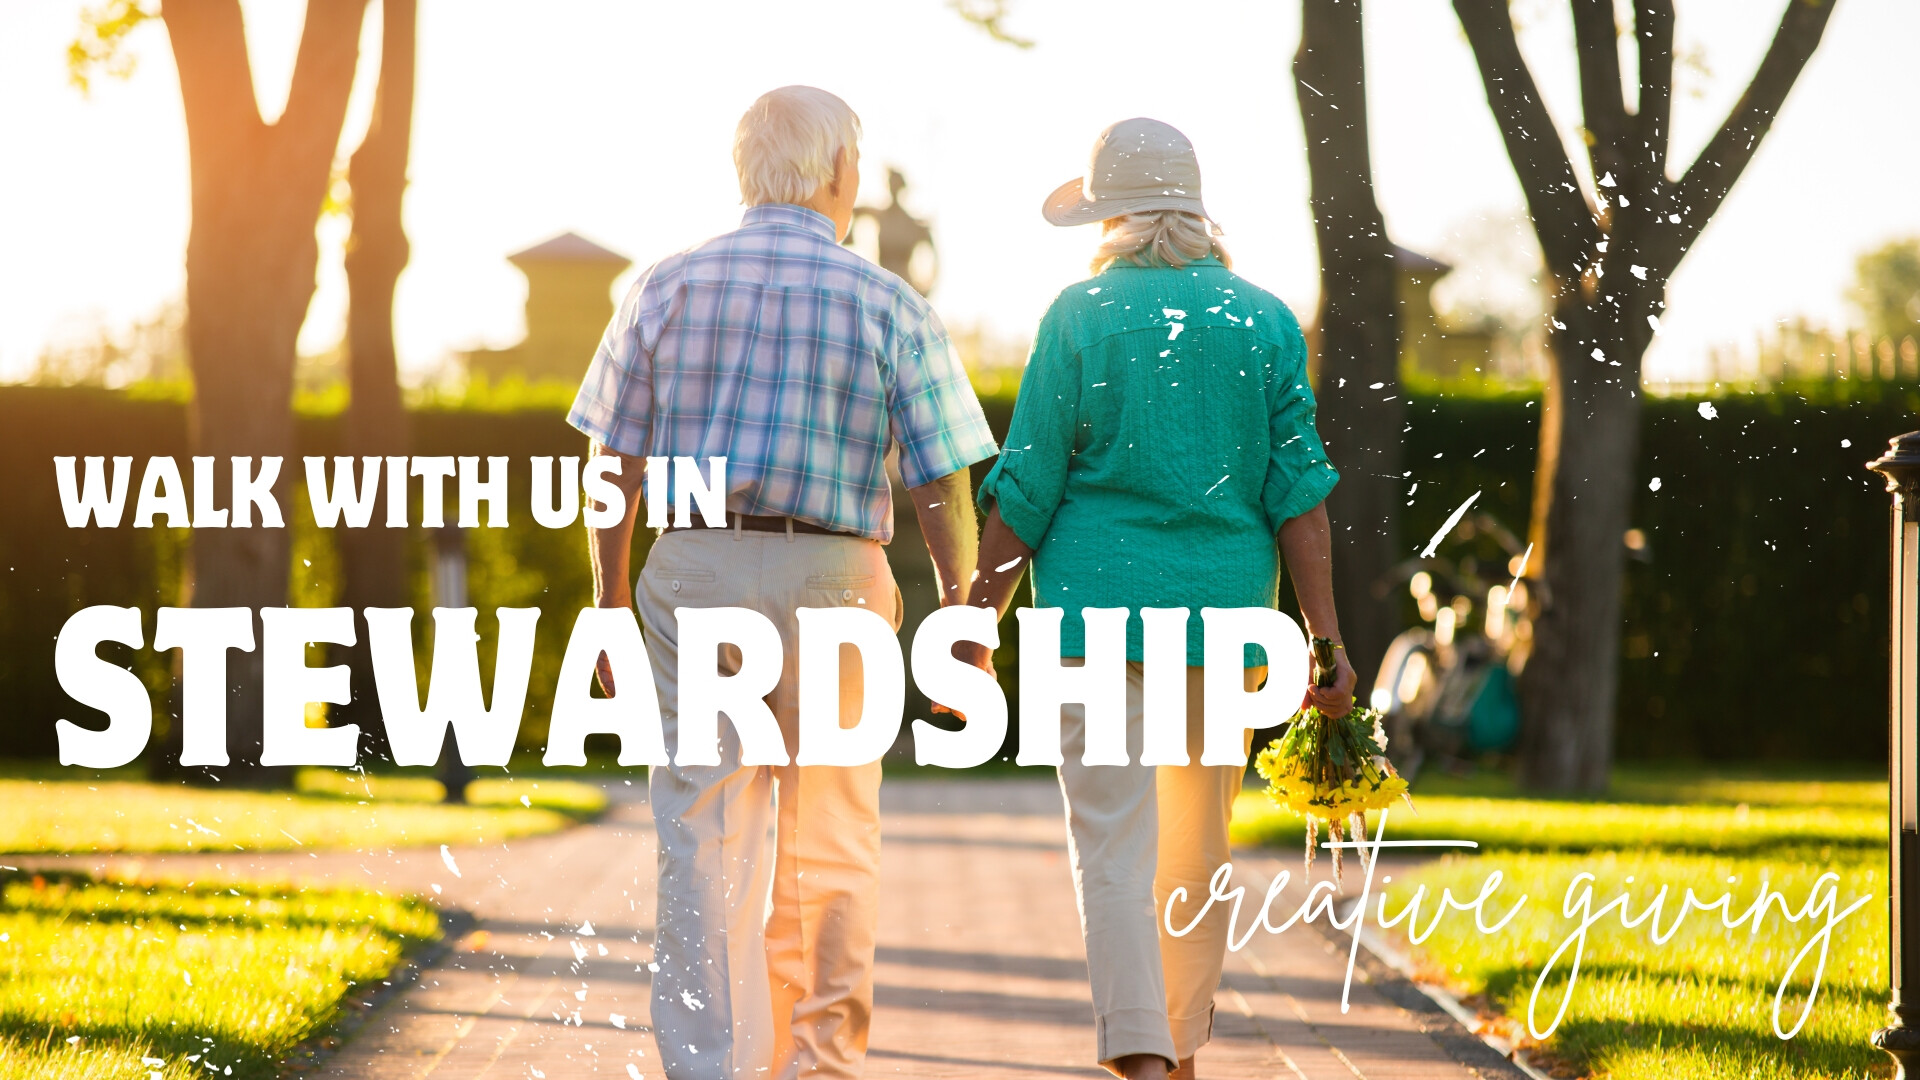 Walk With Us in Stewardship - Creative Giving